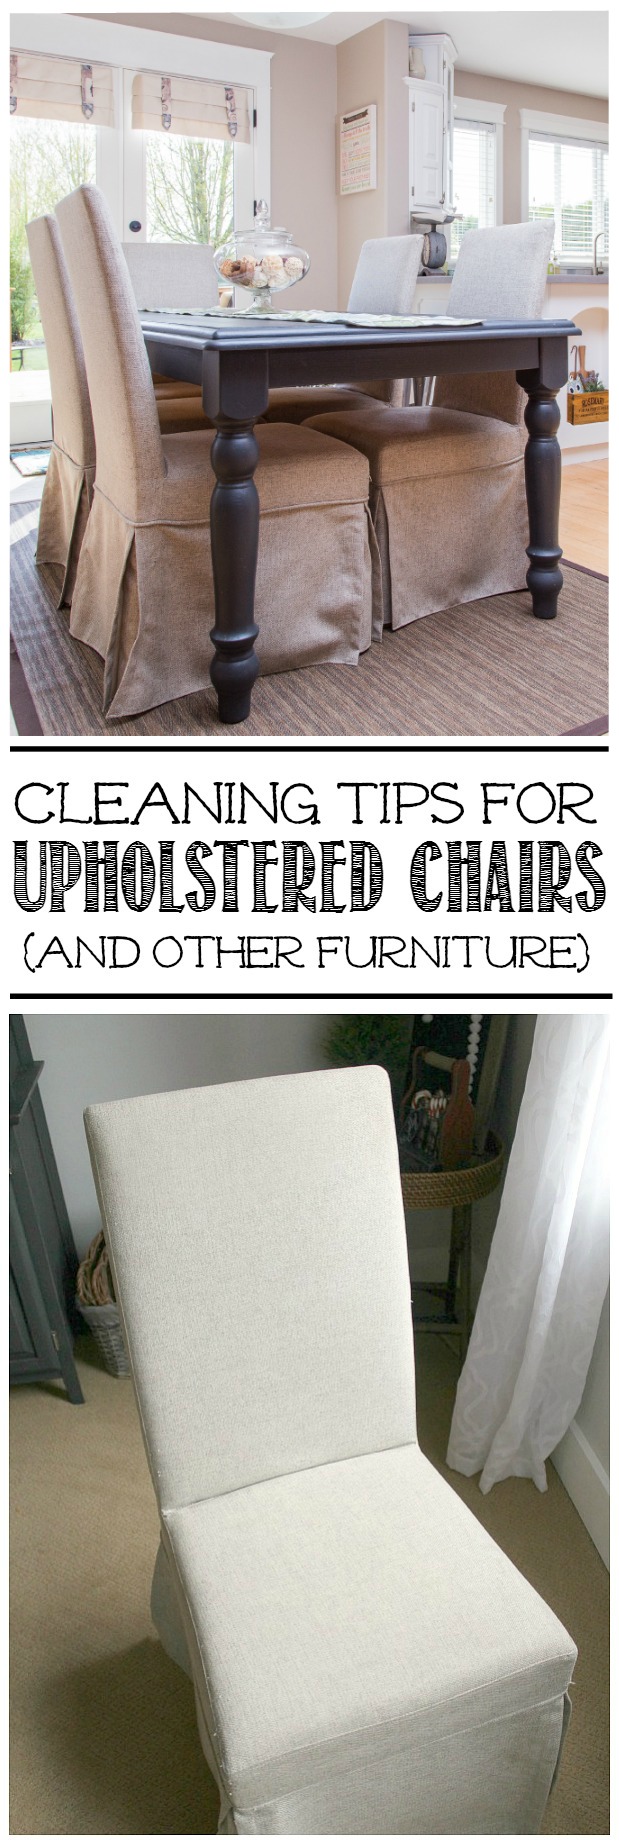 How To Clean Upholstered Chairs, How To Clean Fabric Dining Room Chairs